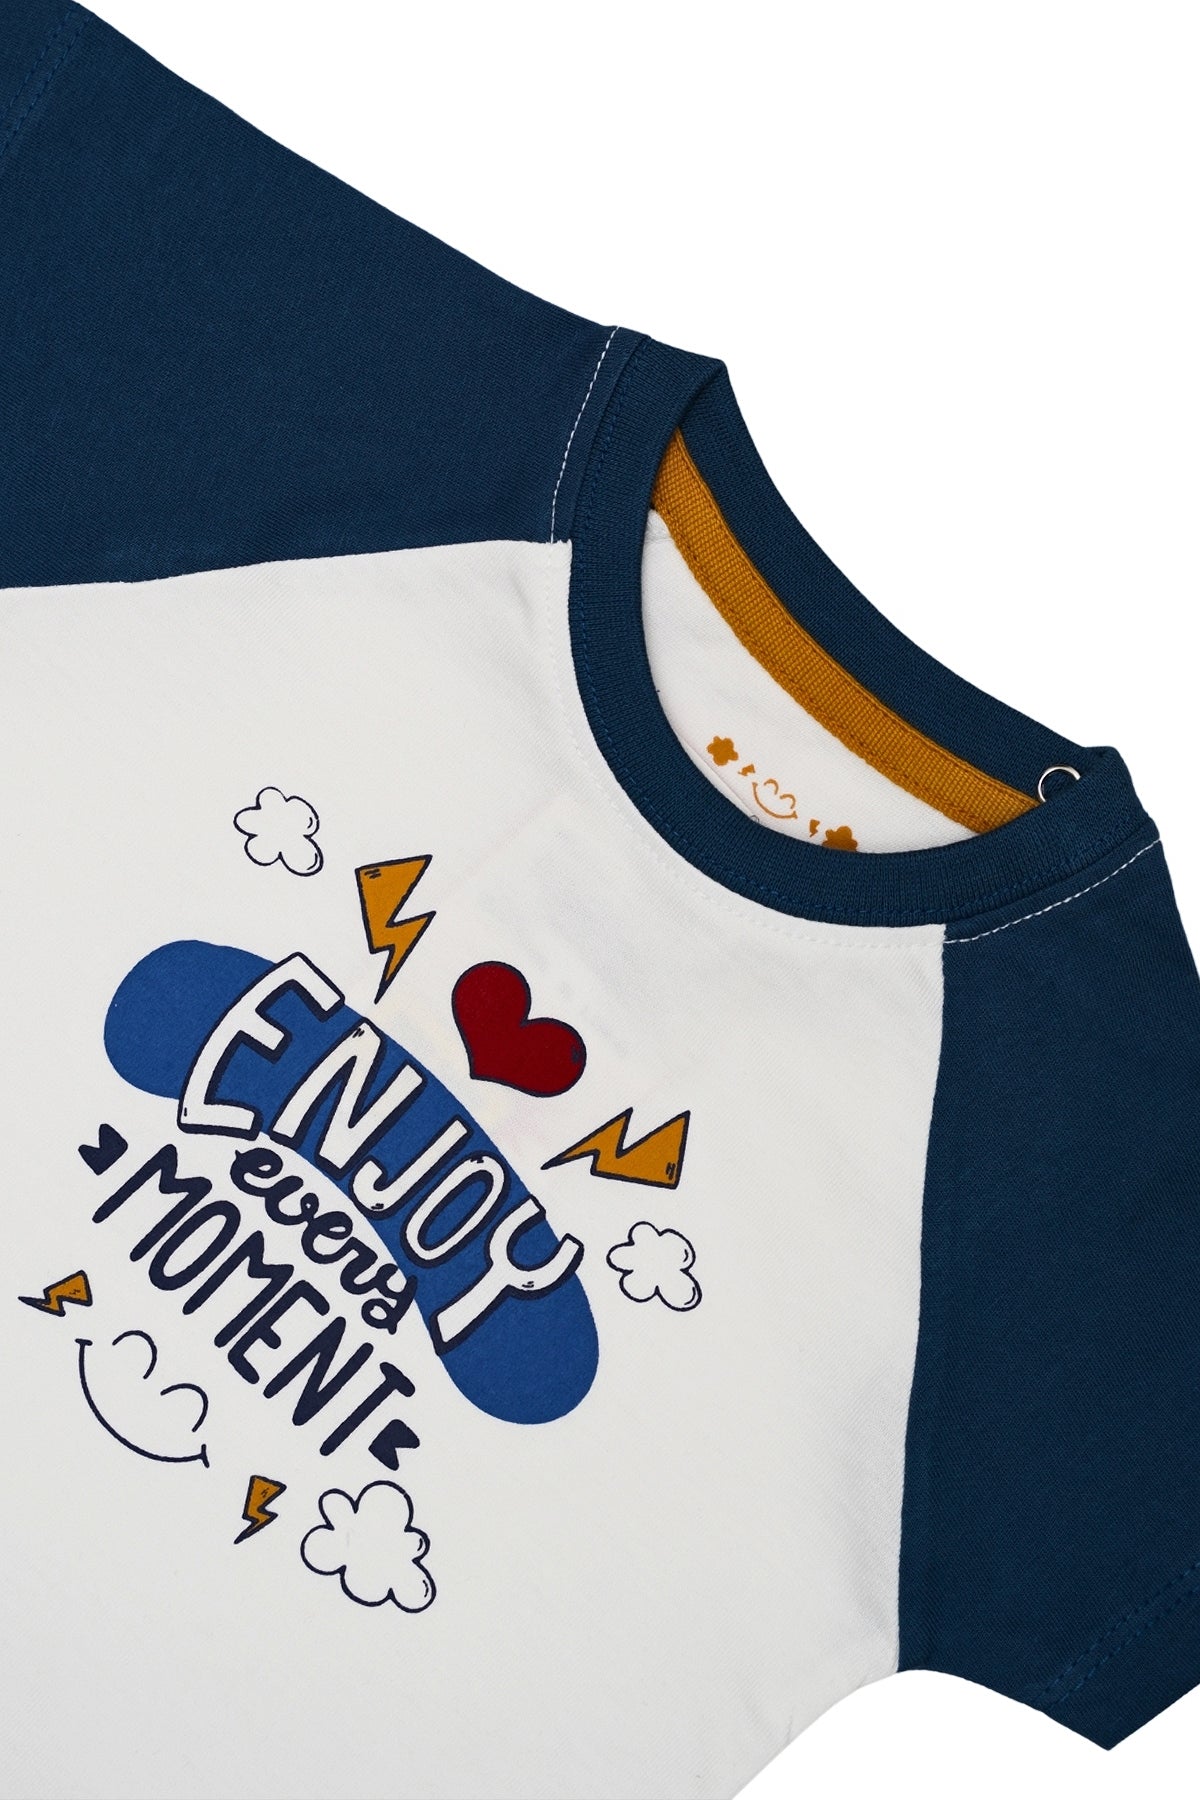 Graphic T-Shirt With Raglan Sleeves (IBKW-215)